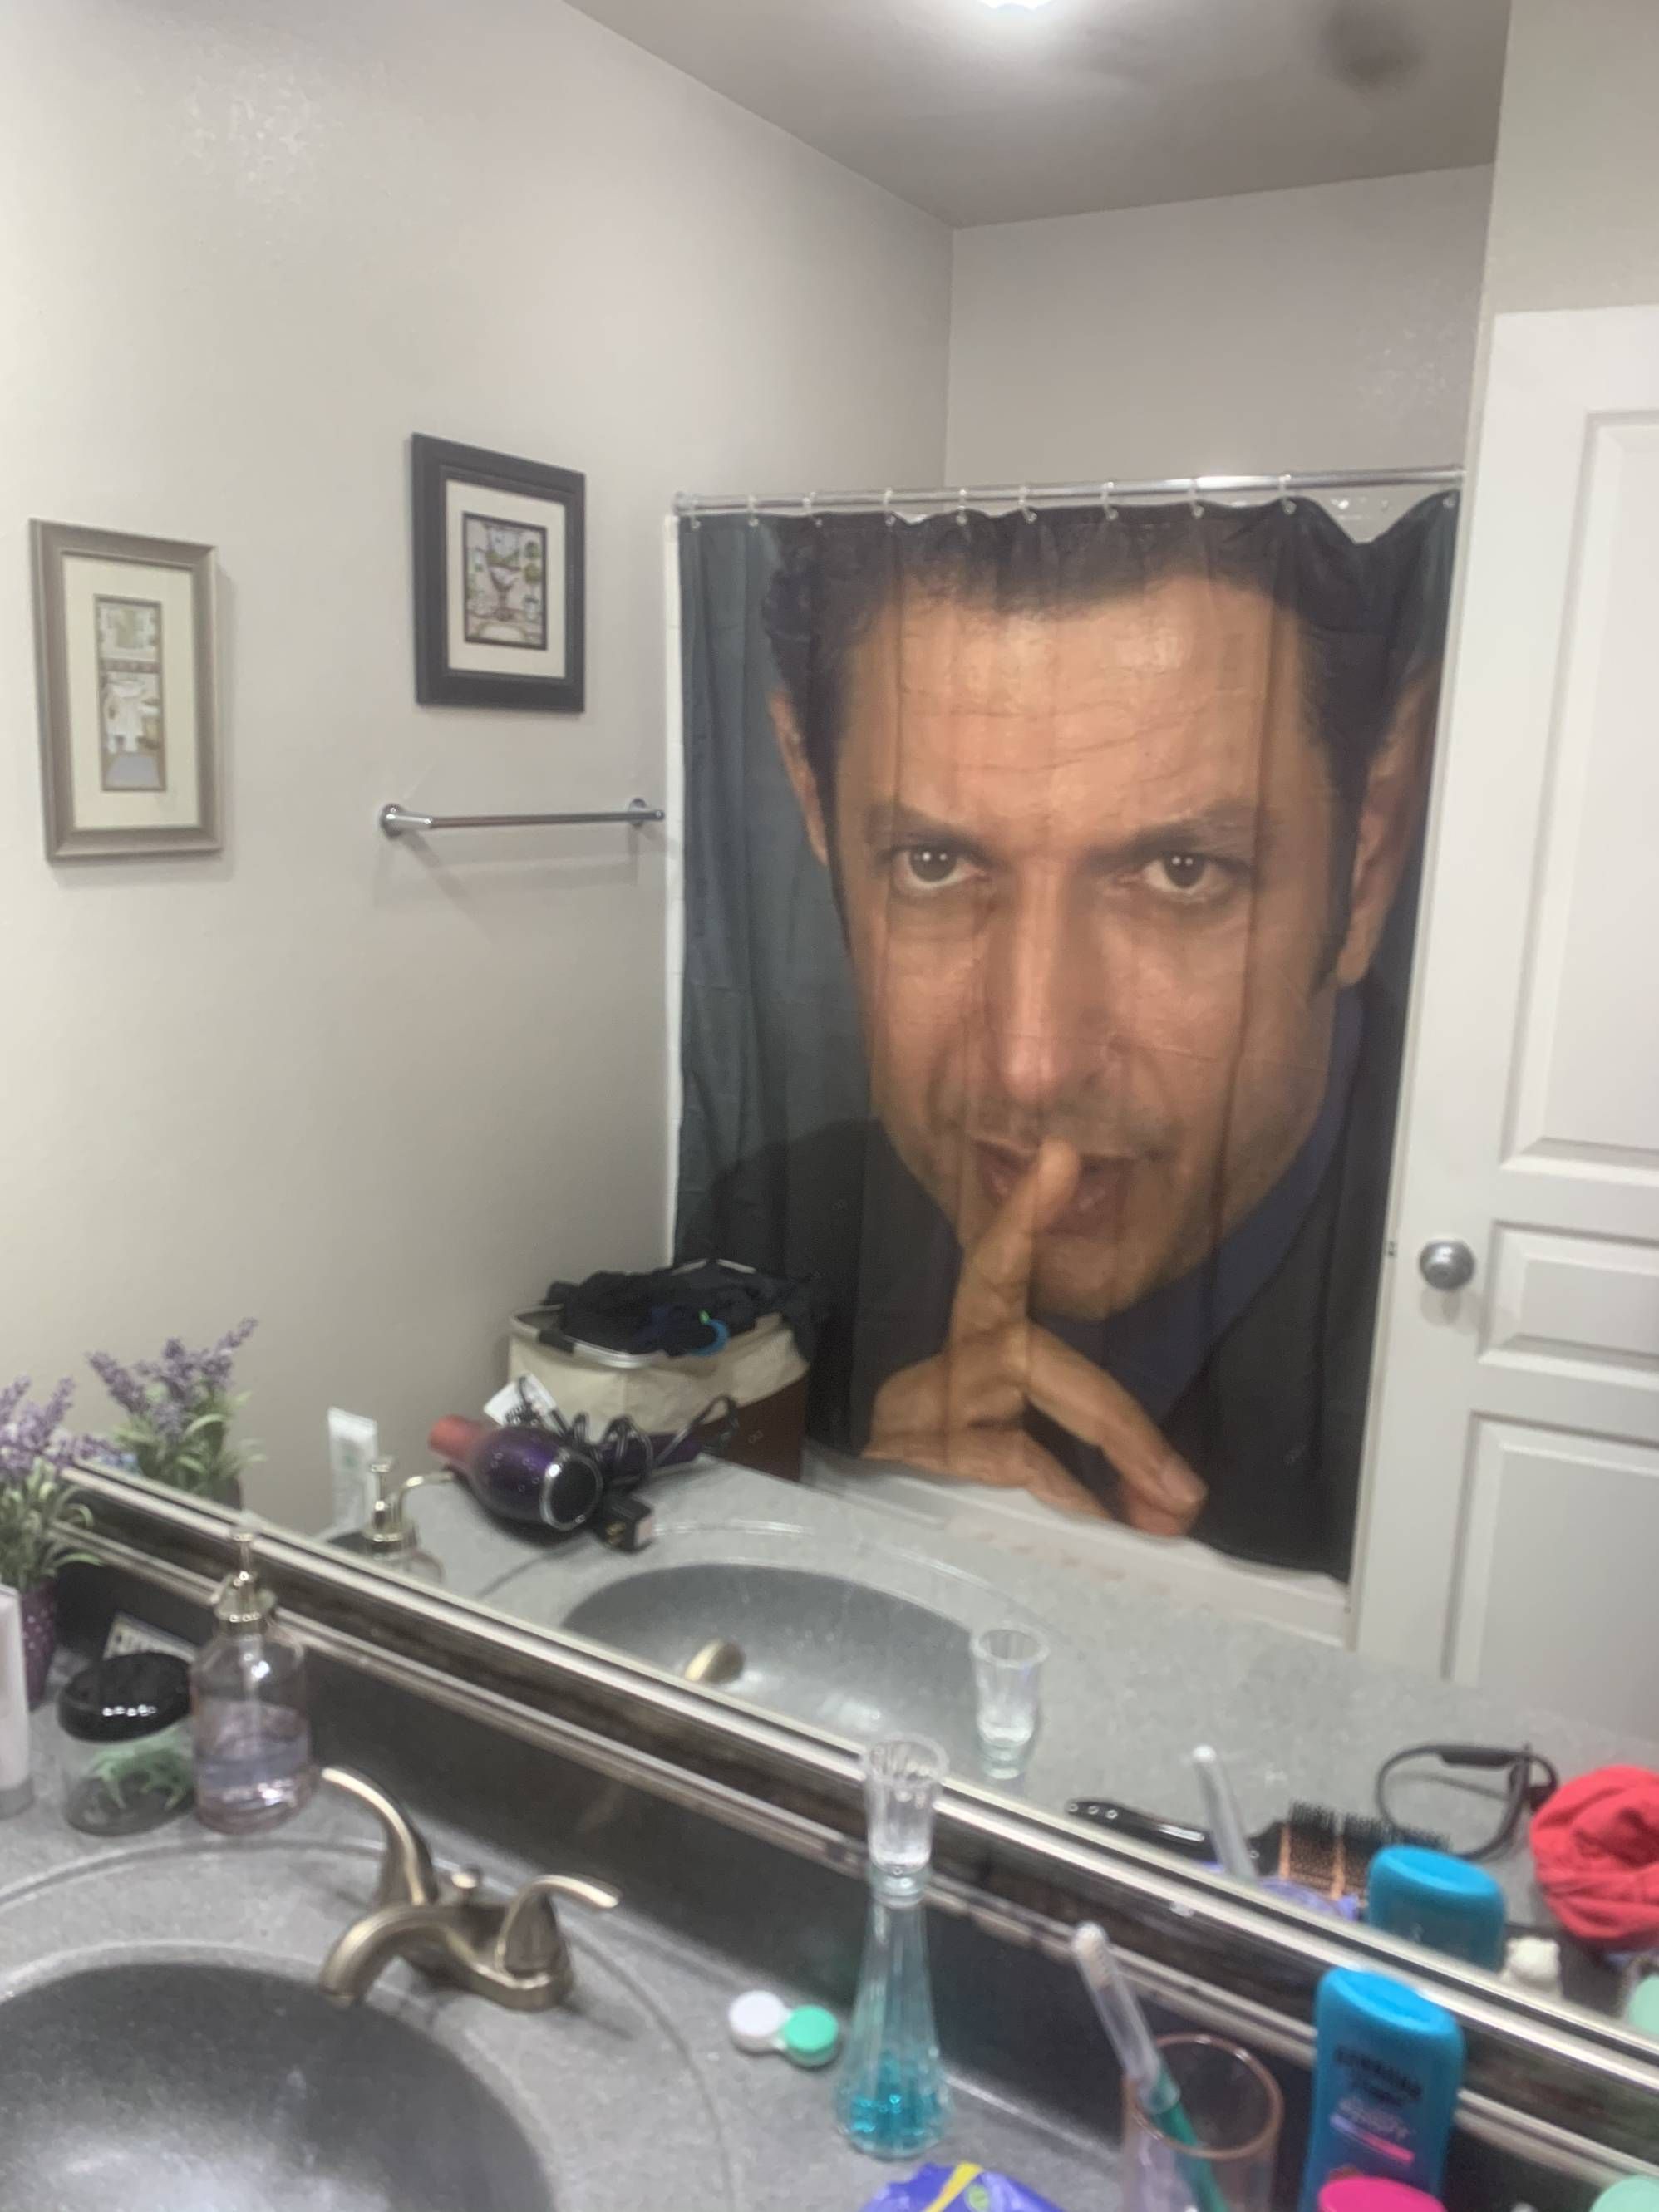 Decided to surprise my girlfriend with a new shower curtain while she’s gone for the day. Hope I’m still home and not at work when she discovers it.